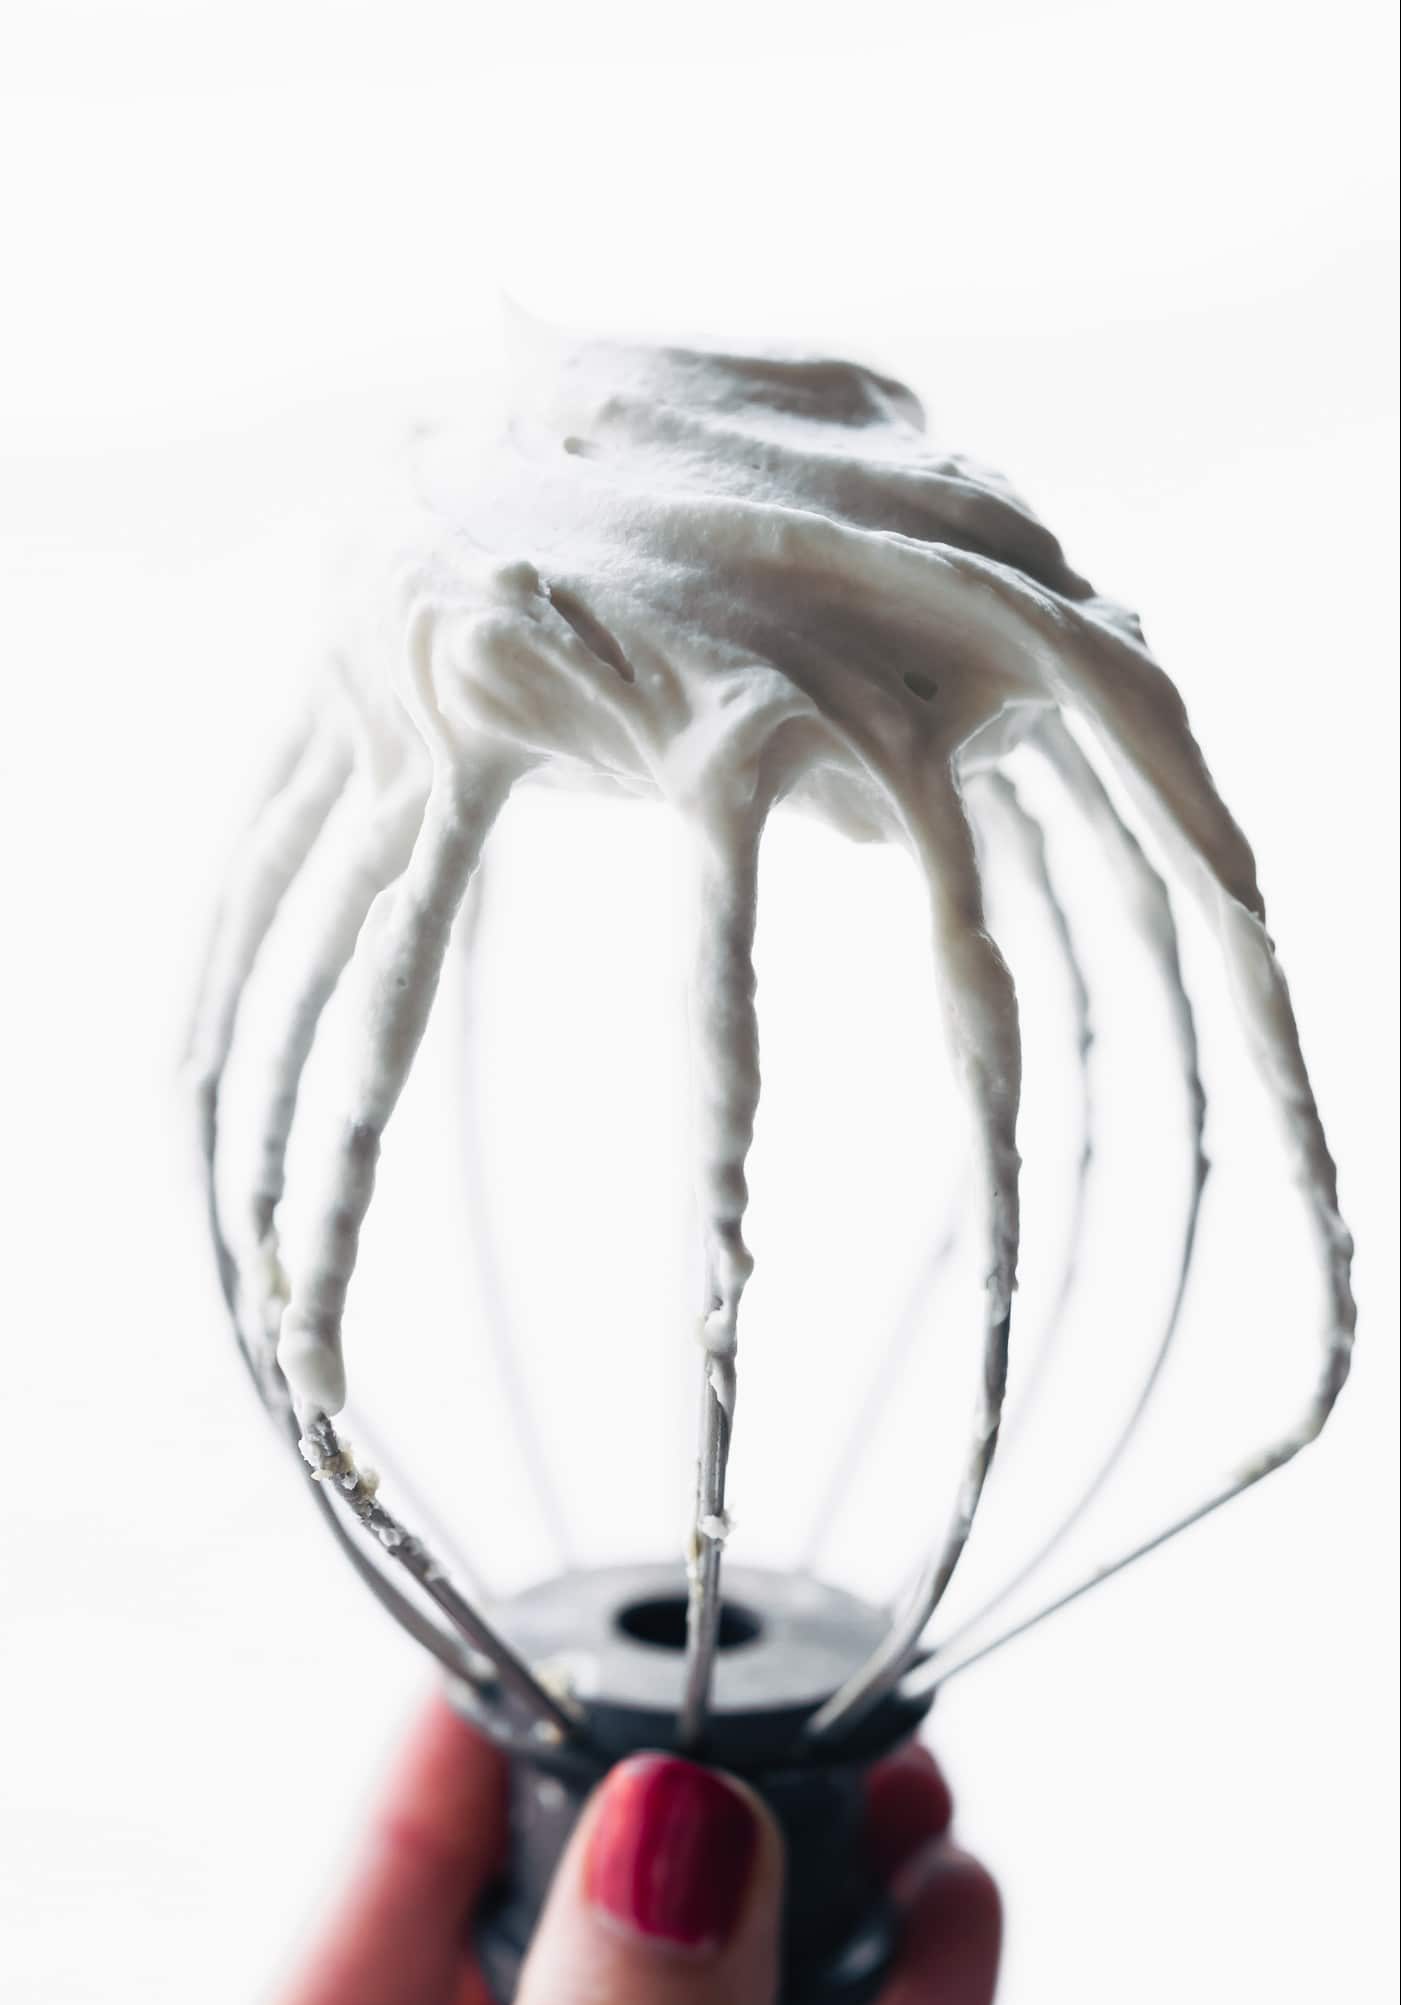 A stand mixer whisk with coconut whip cream on wires being held